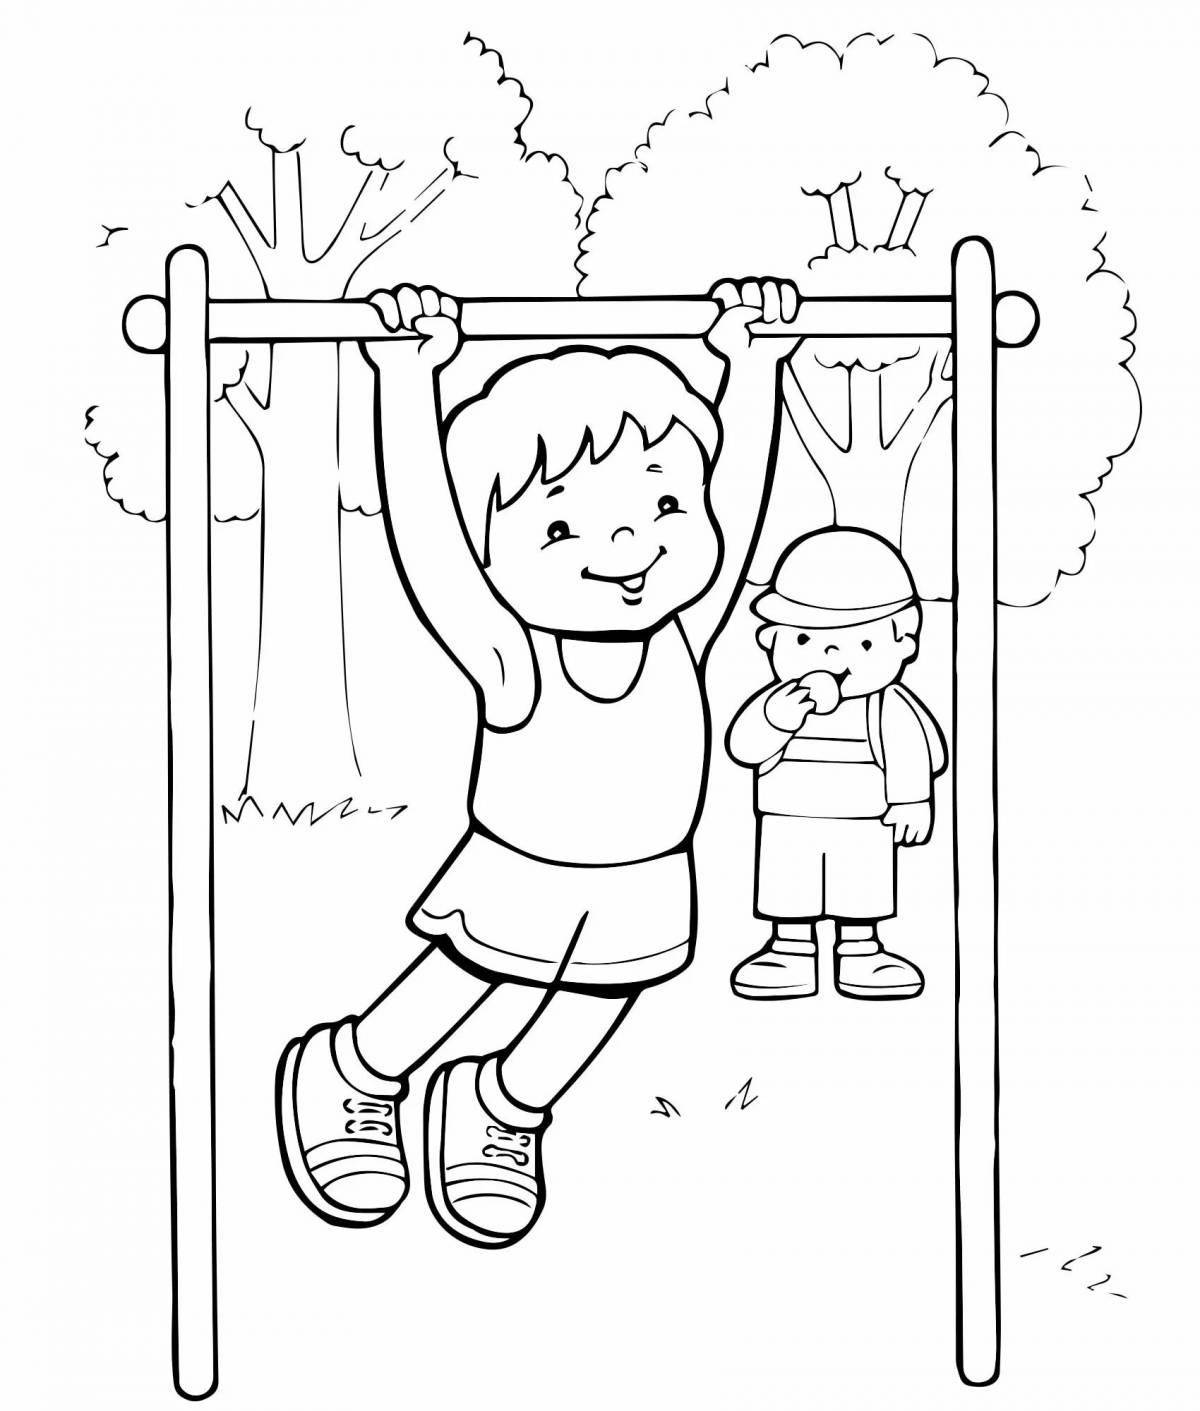 Vibrant health coloring page for 3-4 year olds